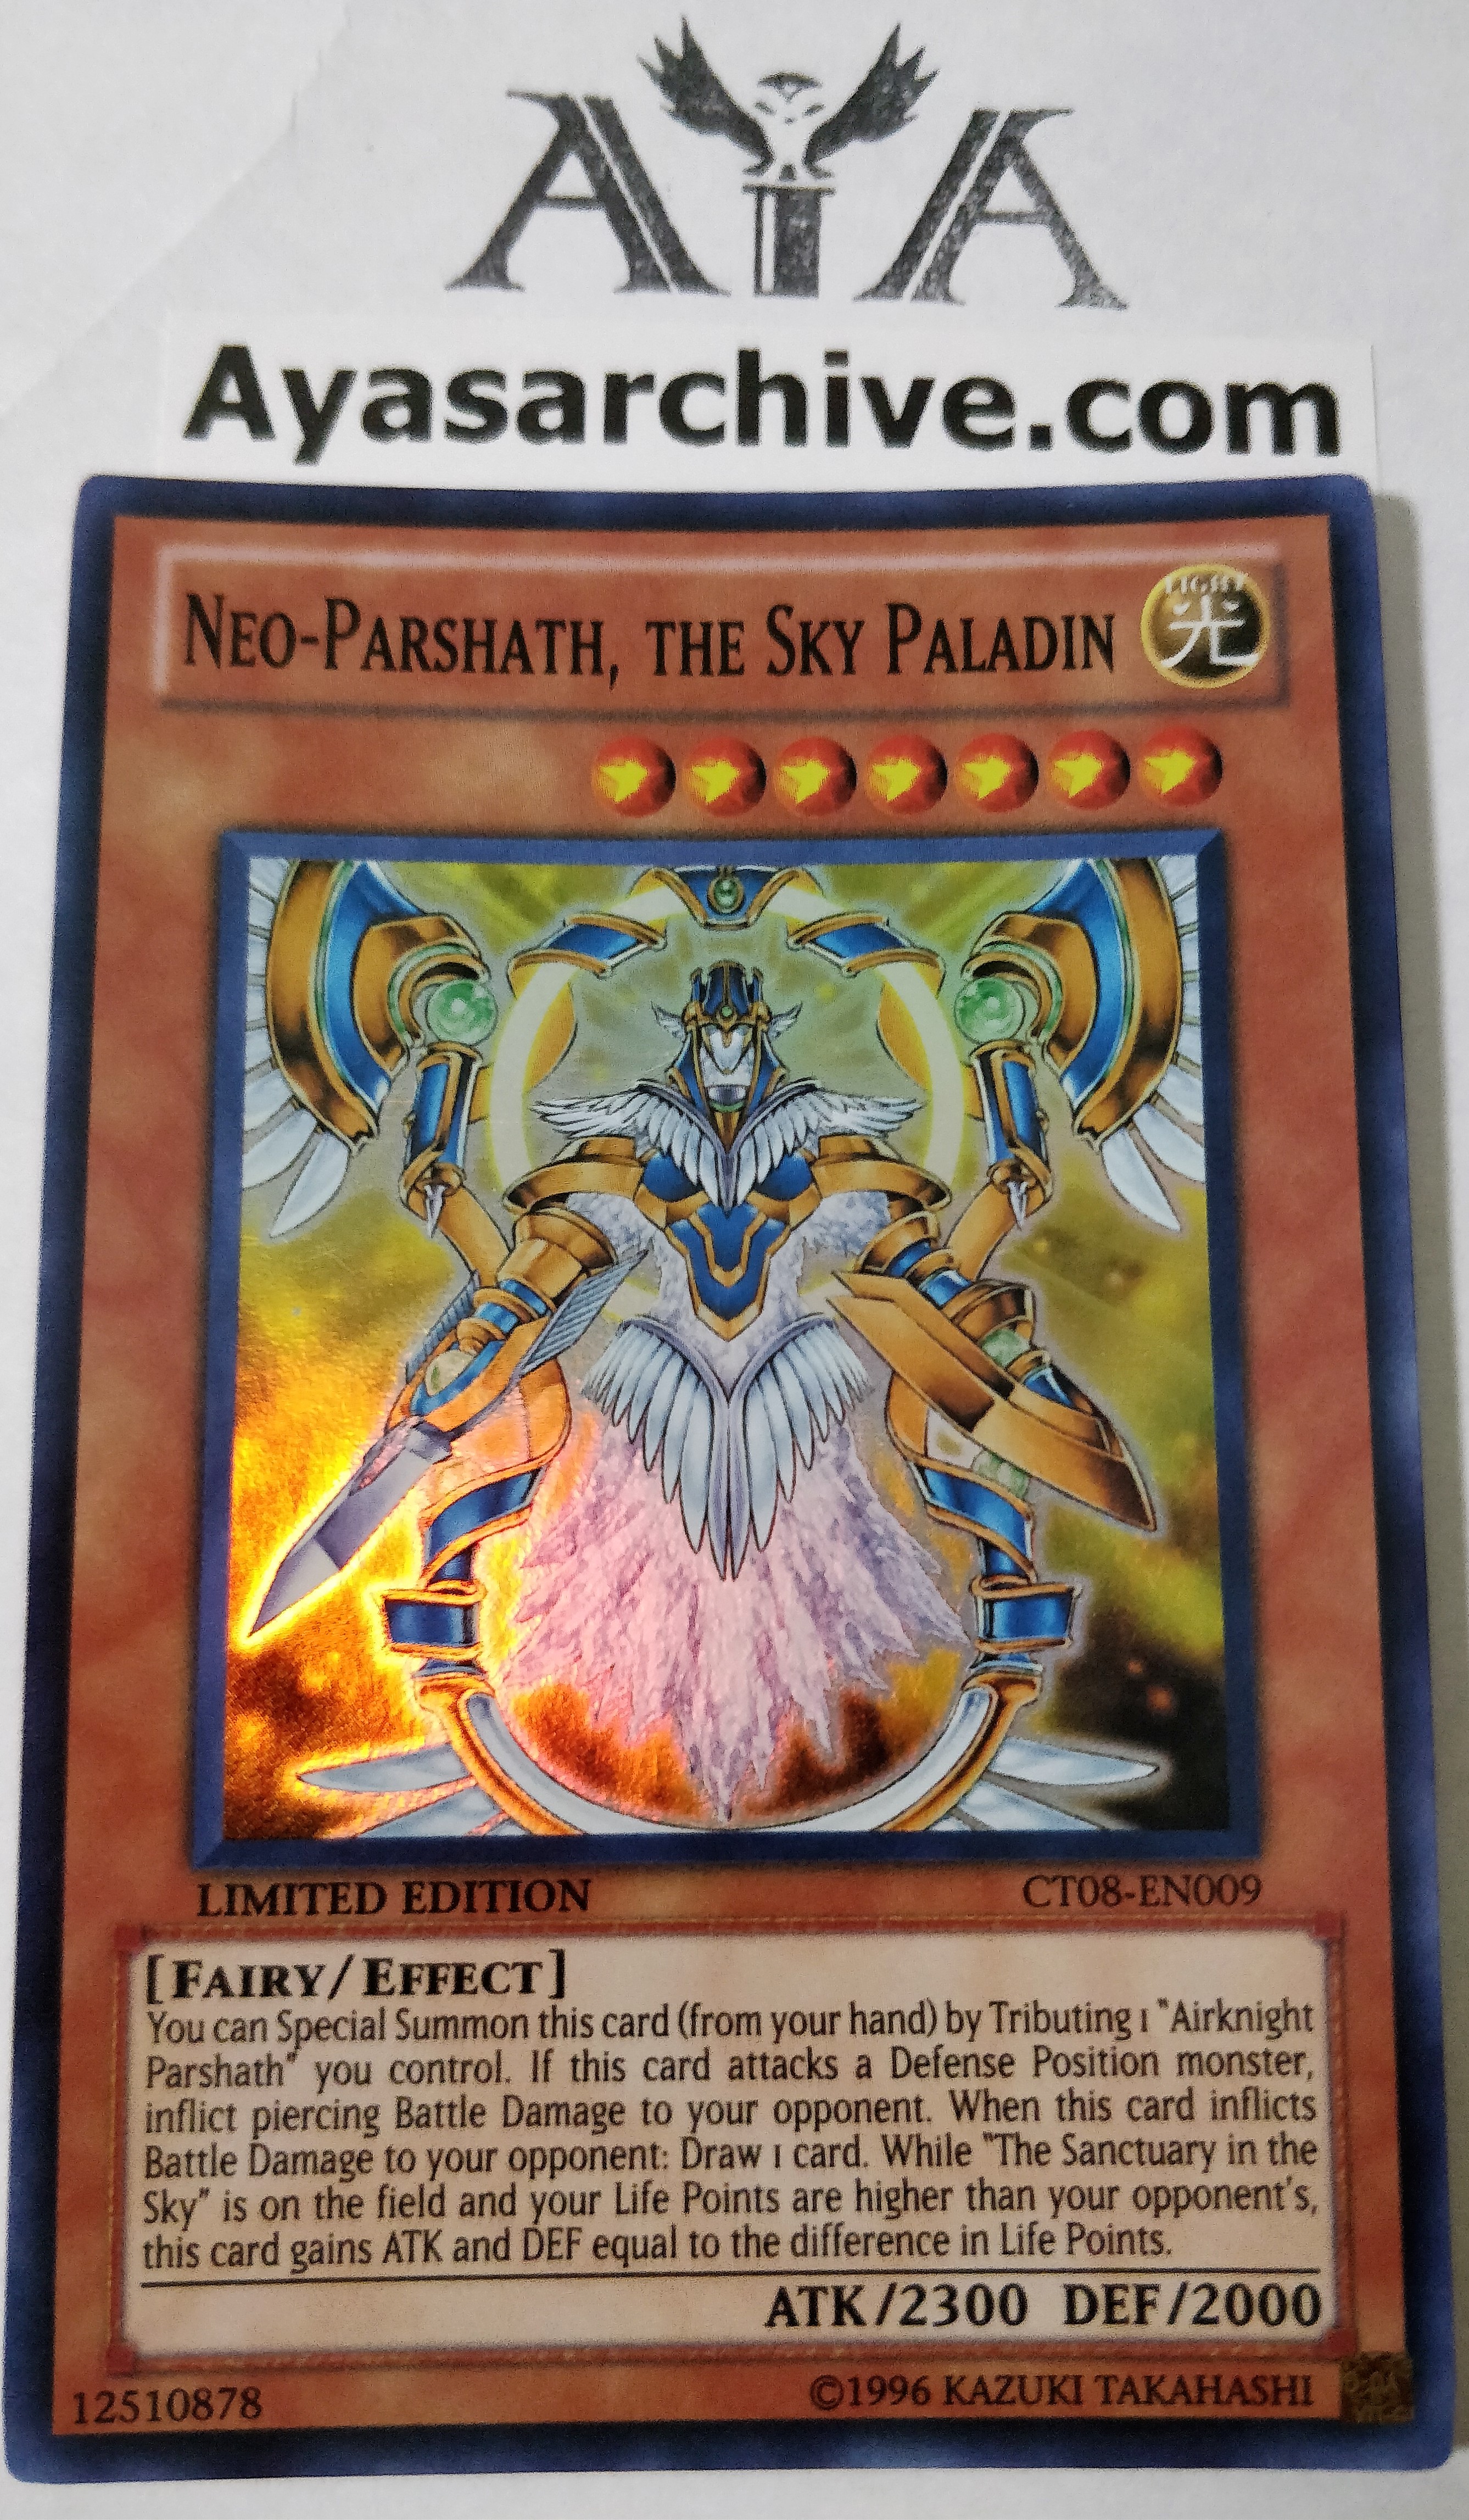 Neo-Parshath, the Sky Paladin - CT08-EN009 - Super Rare - Limited Edition